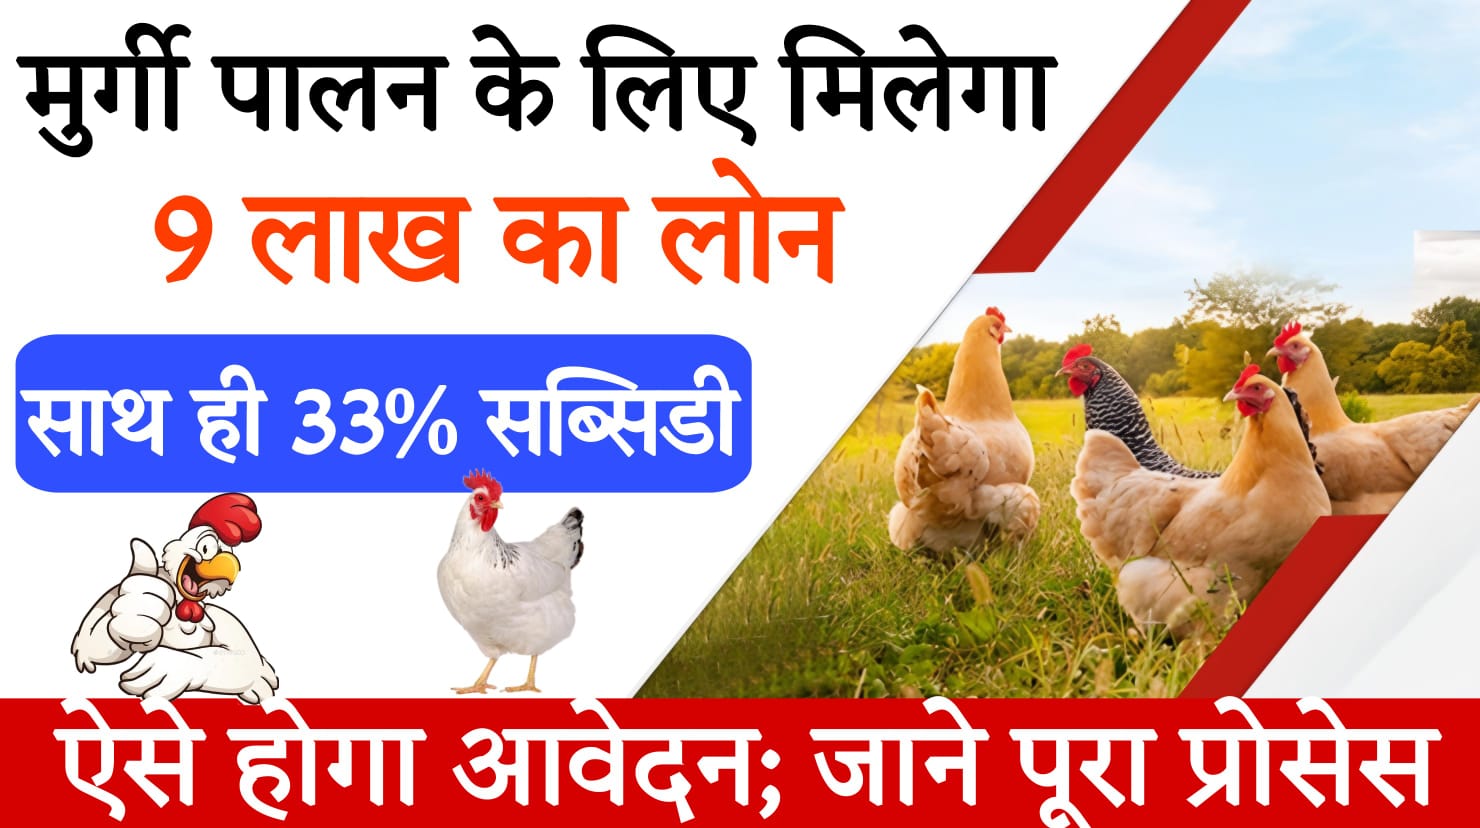 poultry farming project